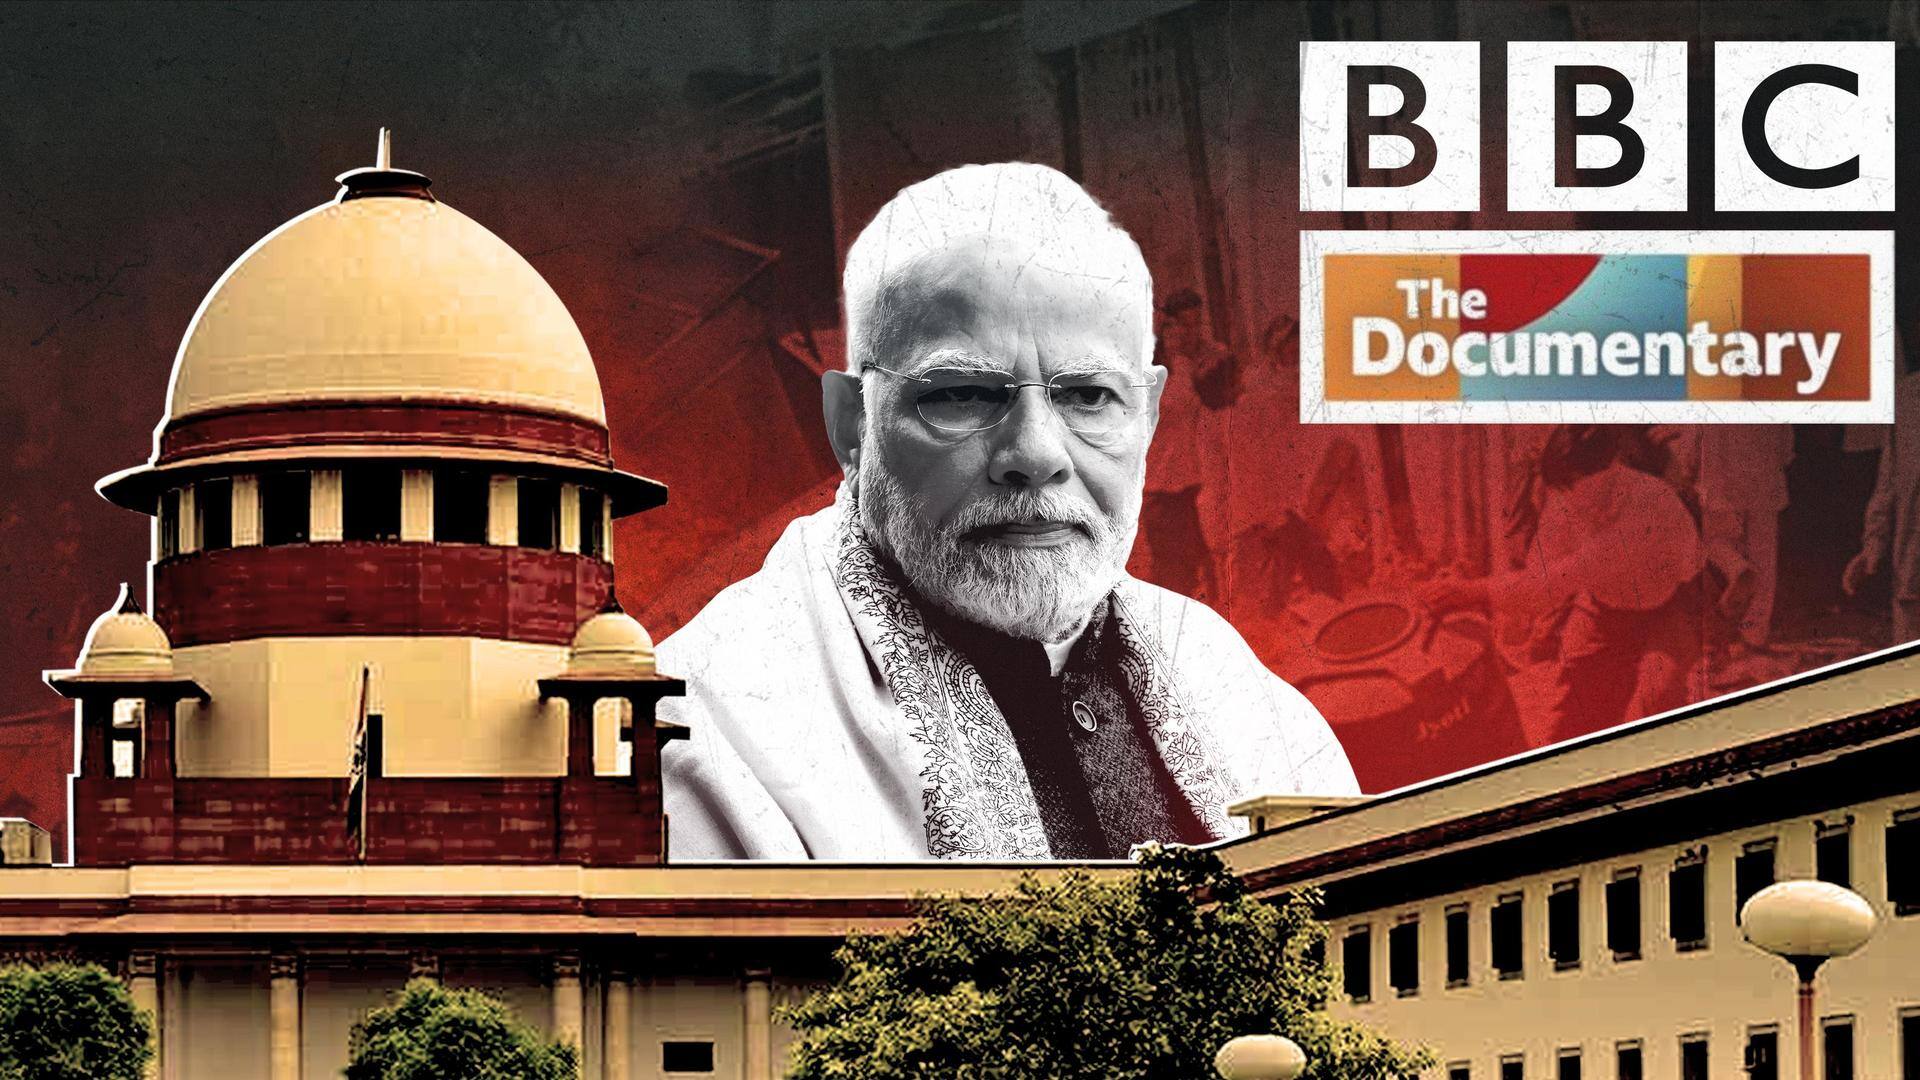 SC junks PIL seeking complete ban on BBC in India